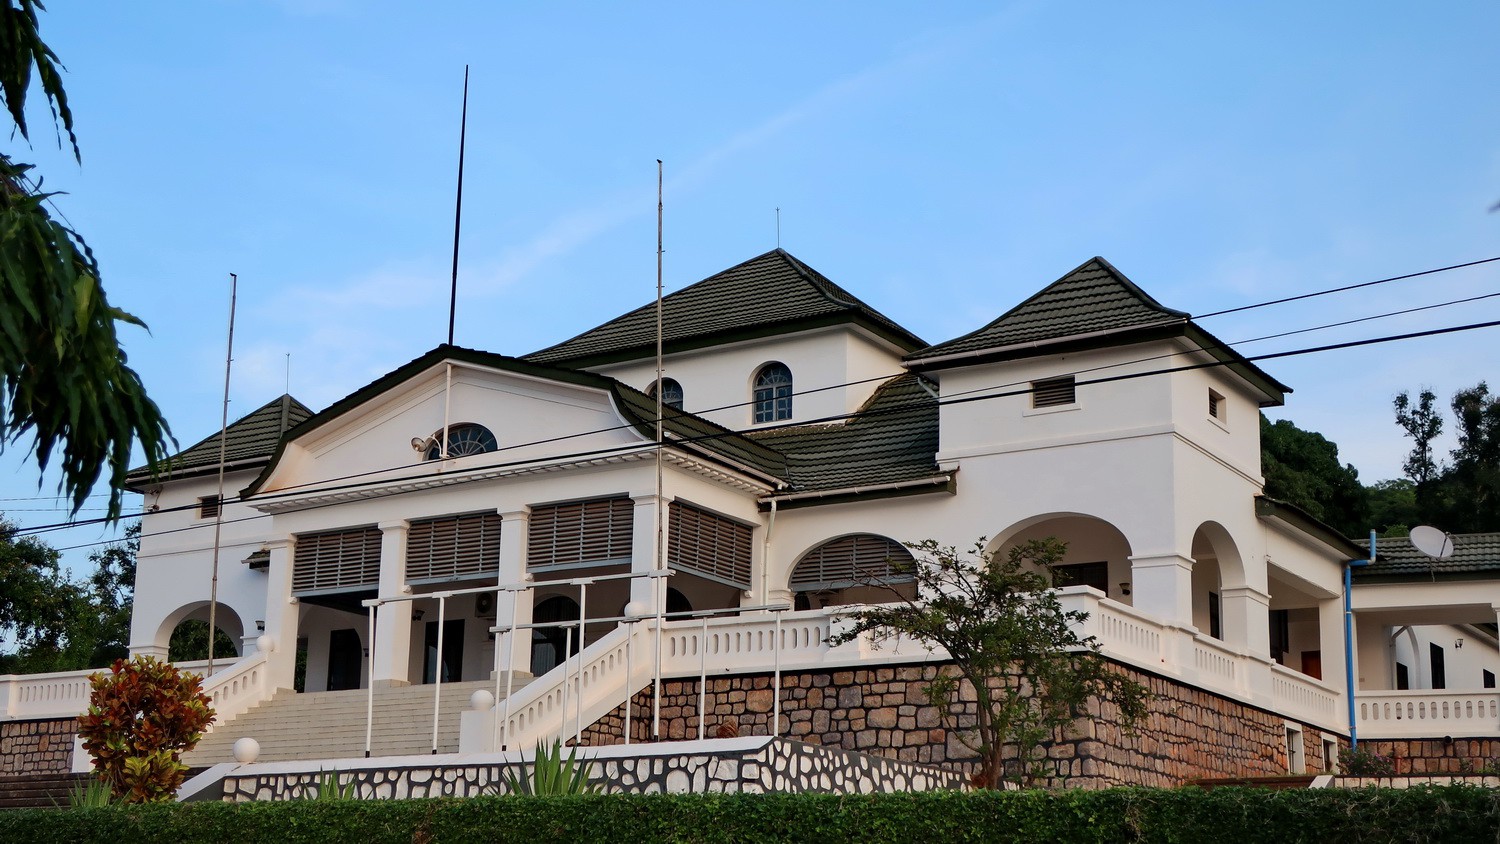 The Kaiser house in Kigoma where the German Emperor never came